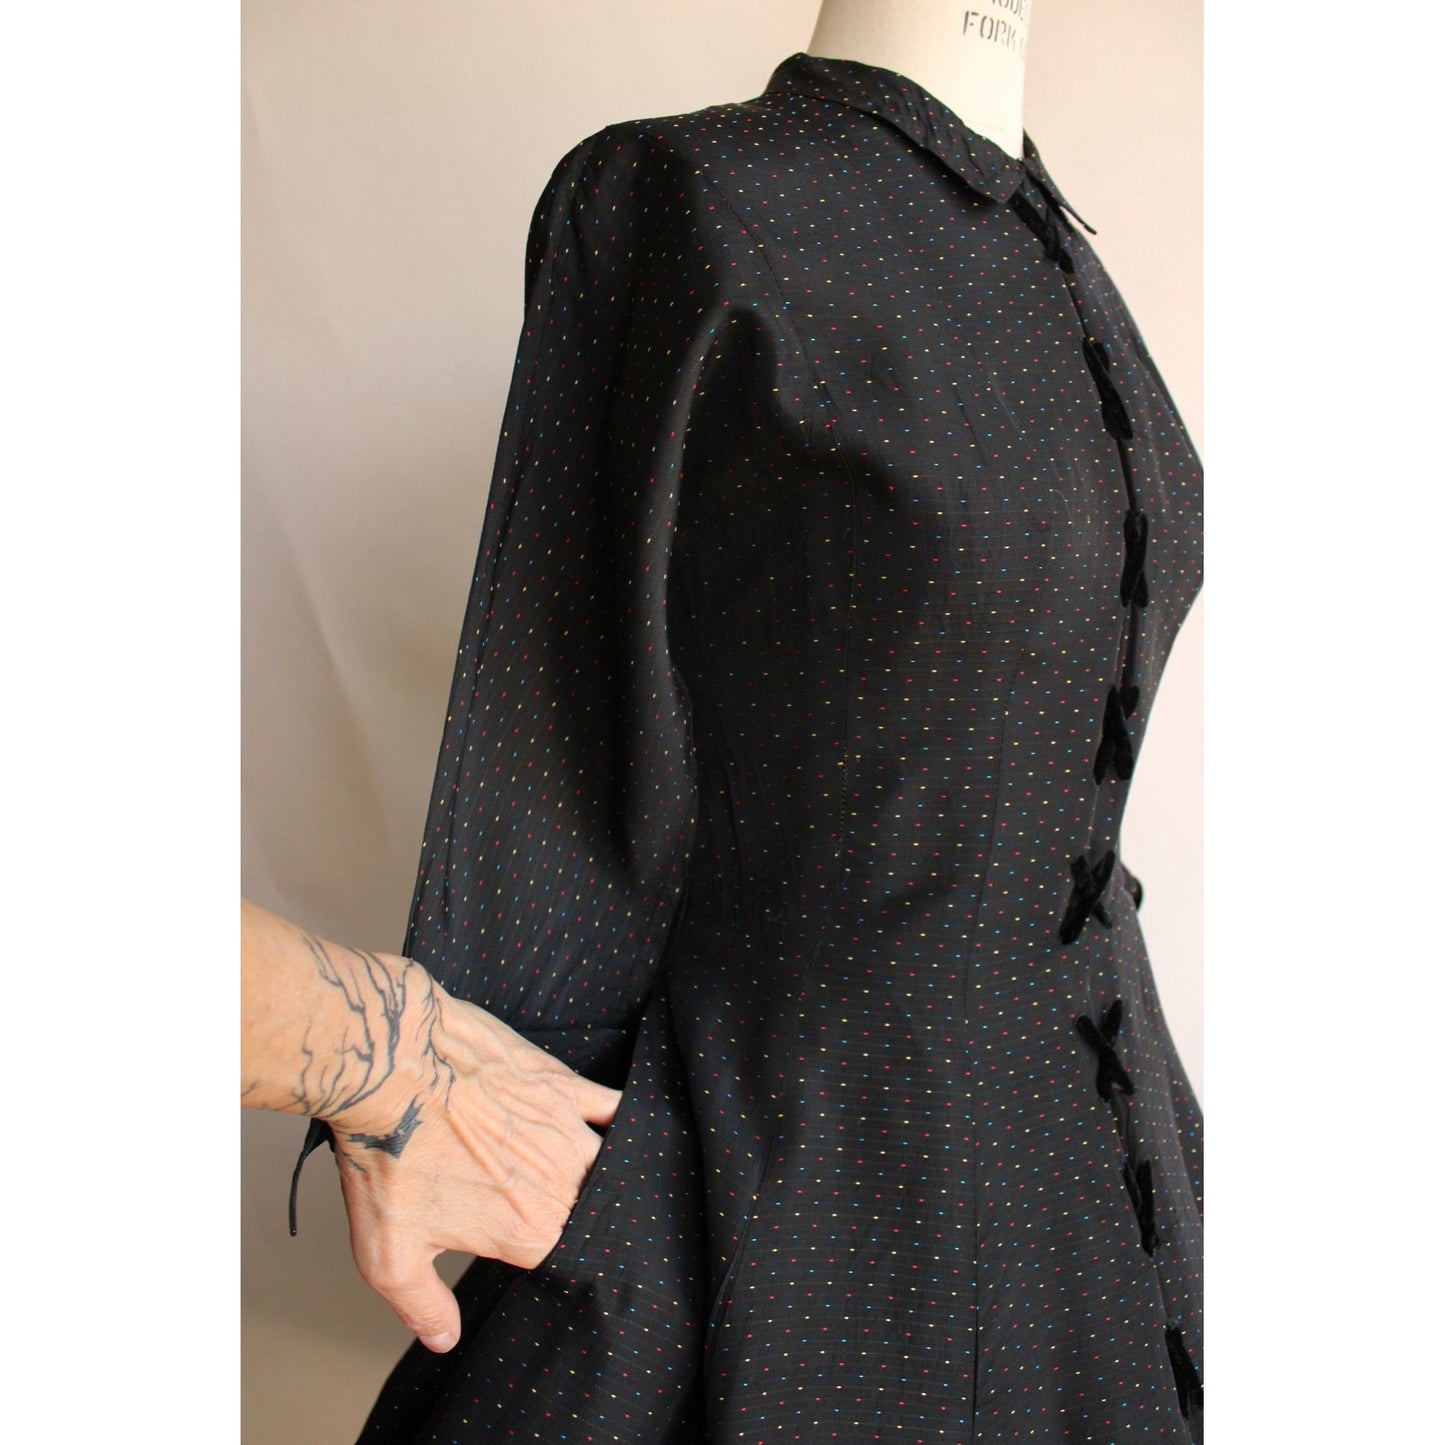 Vintage 1950s Black Taffeta Dress With Multicolor Dots and Velvet Lacing